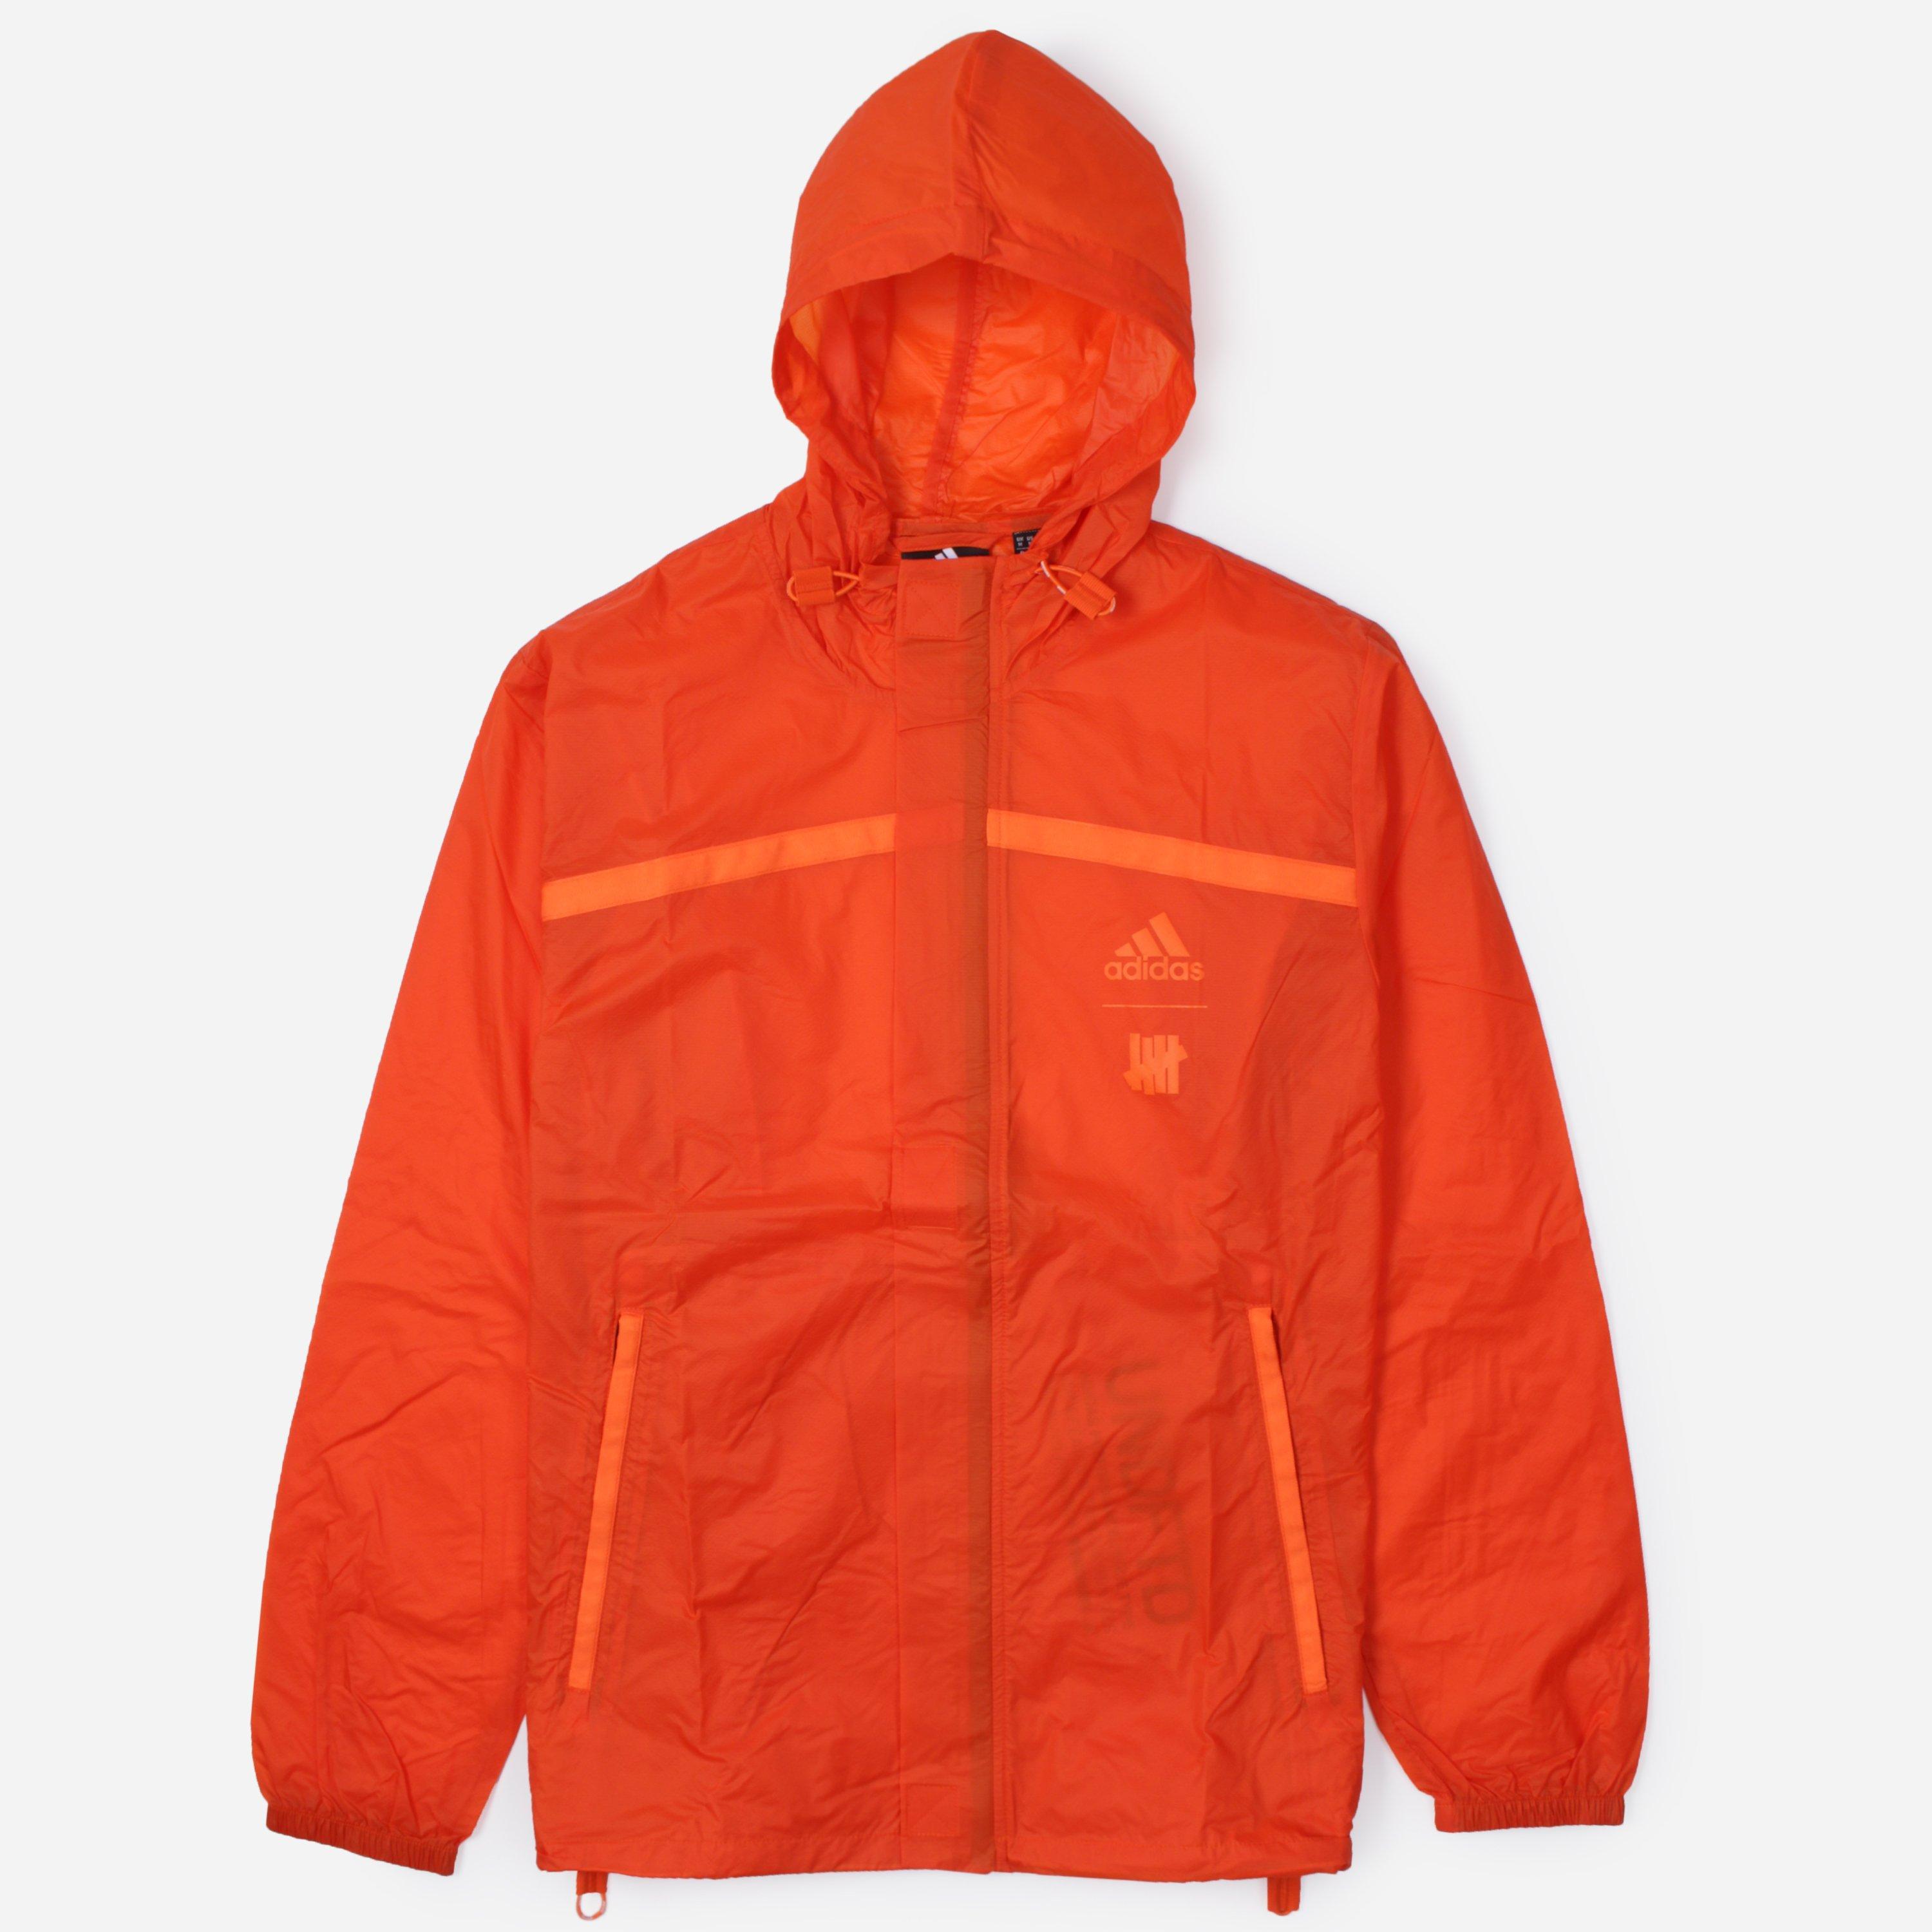 adidas X Undefeated Pack Jacket in Red for Men - Lyst